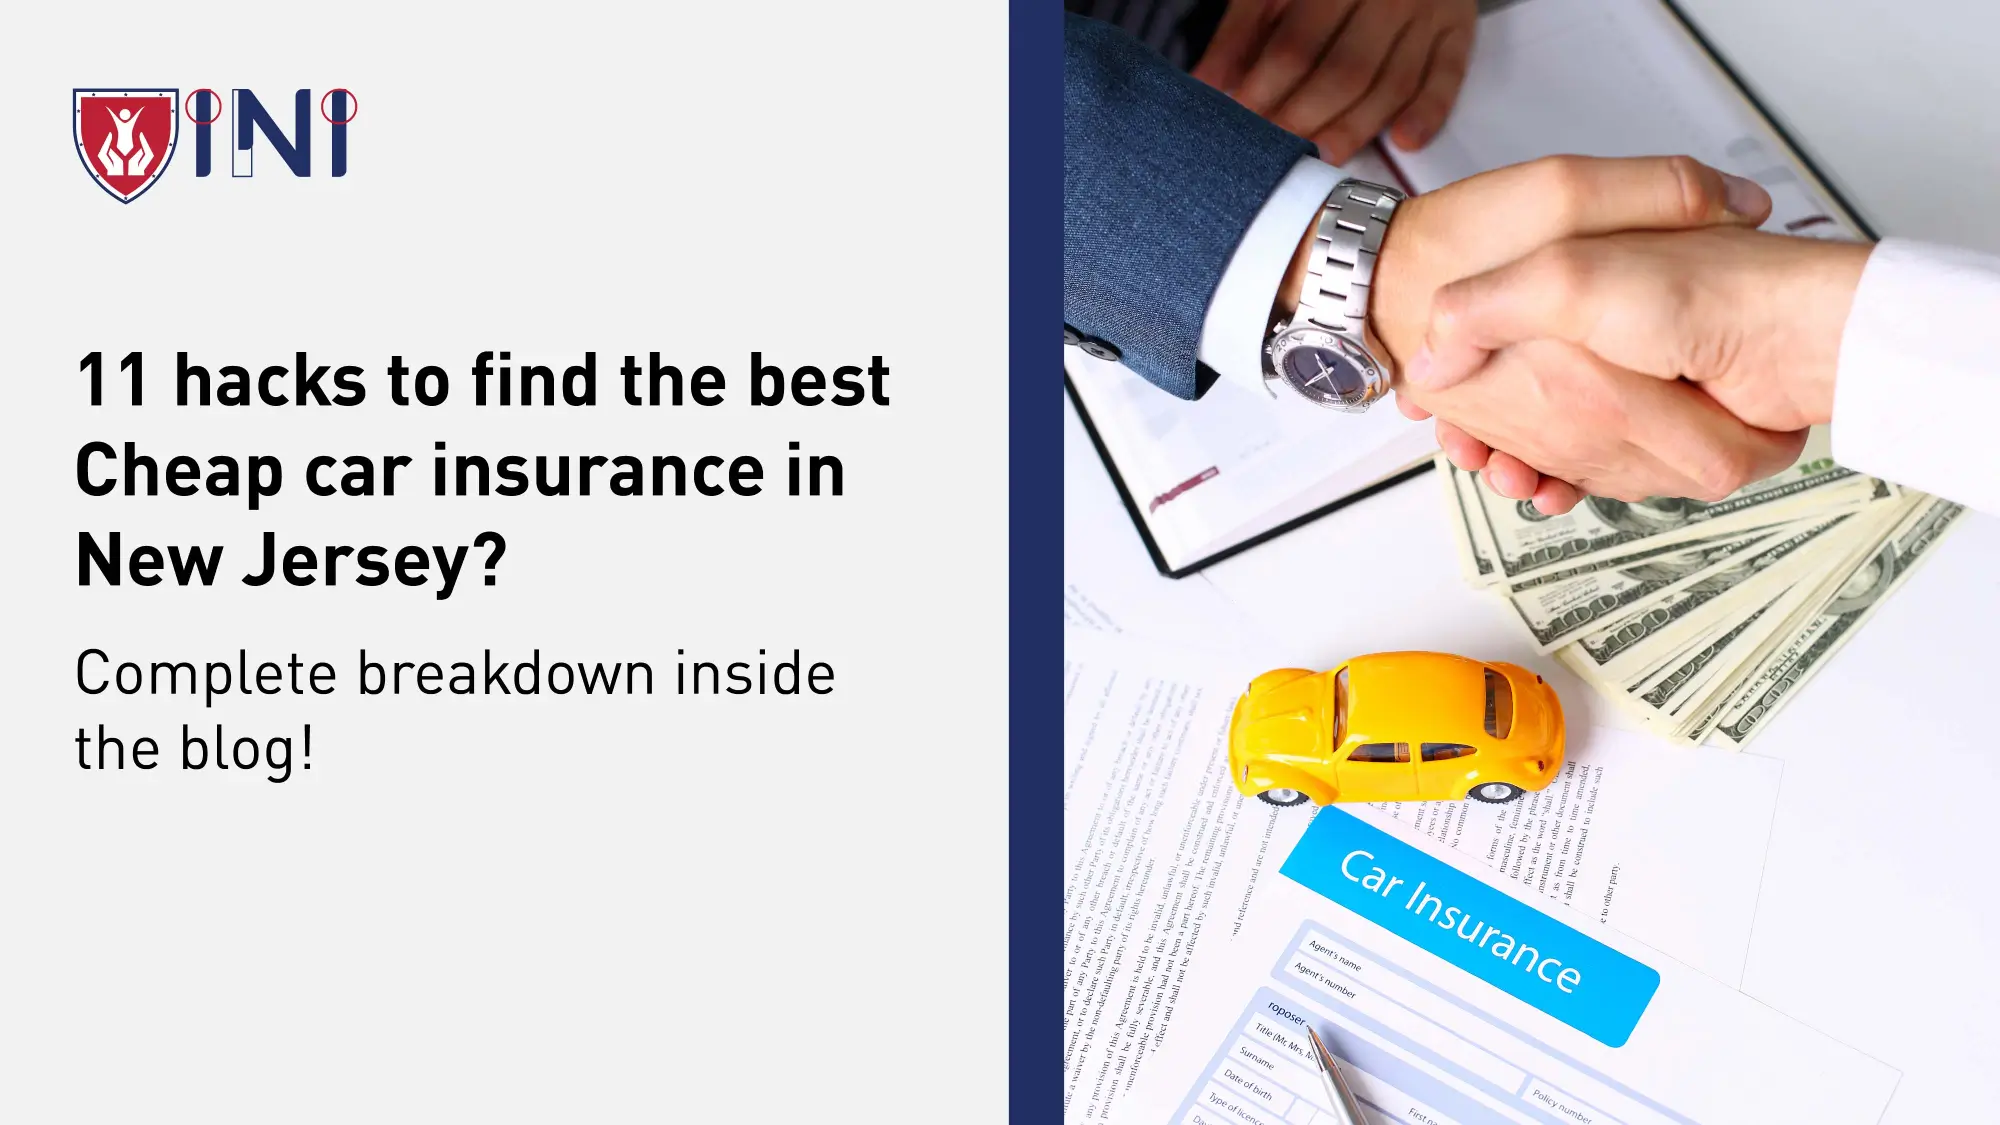 11 hacks to find the best cheap car insurance in New Jersey?